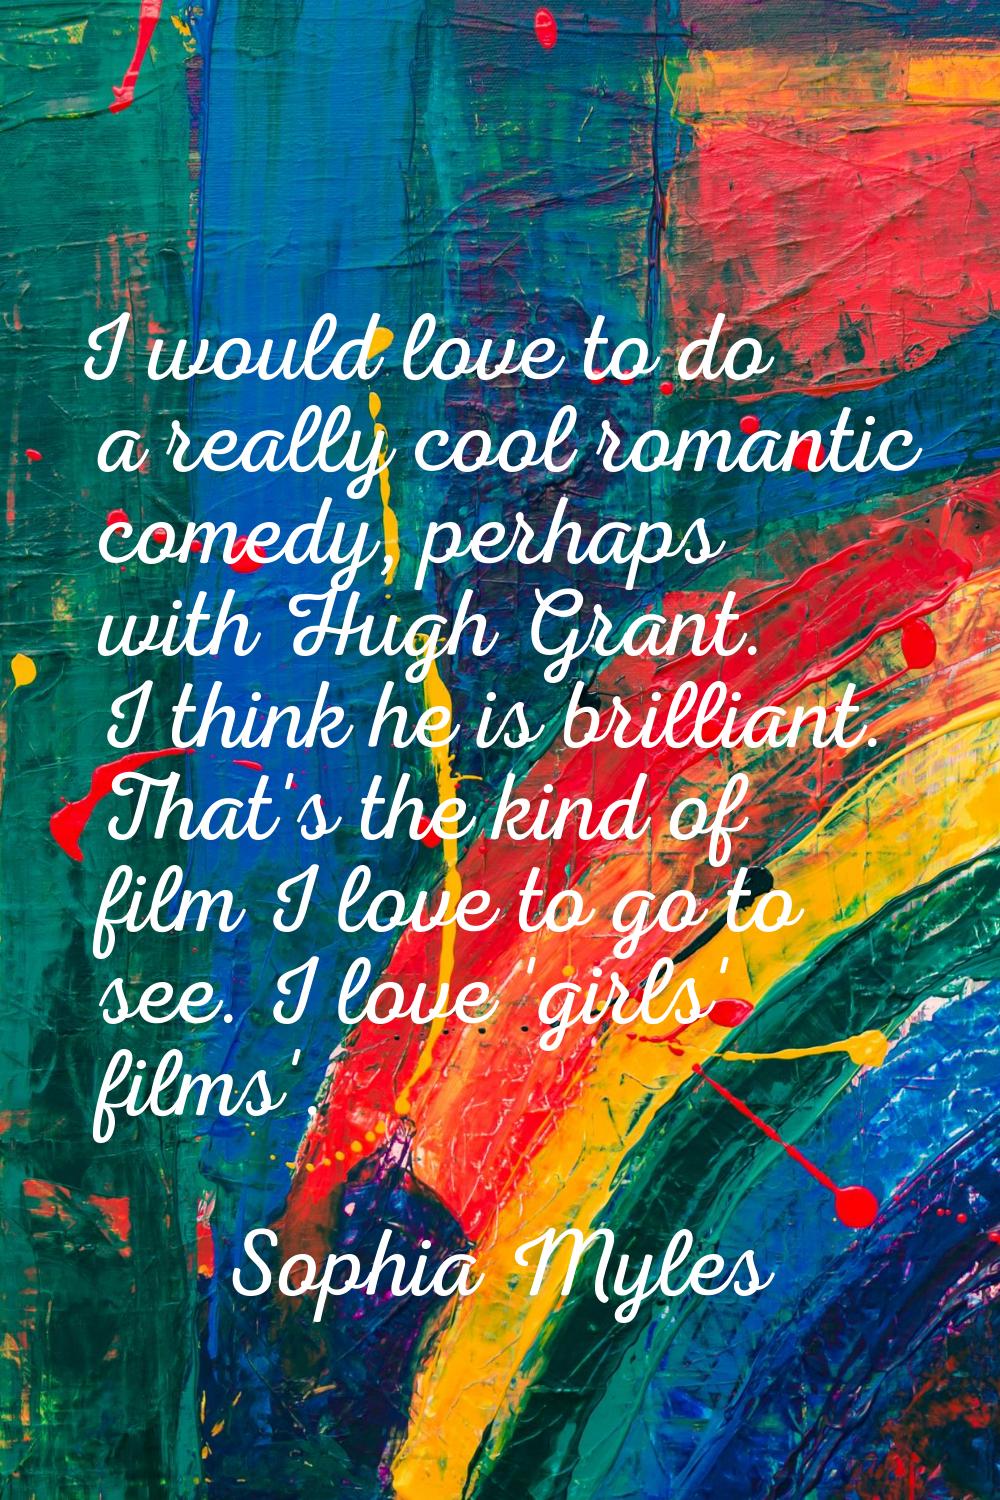 I would love to do a really cool romantic comedy, perhaps with Hugh Grant. I think he is brilliant.